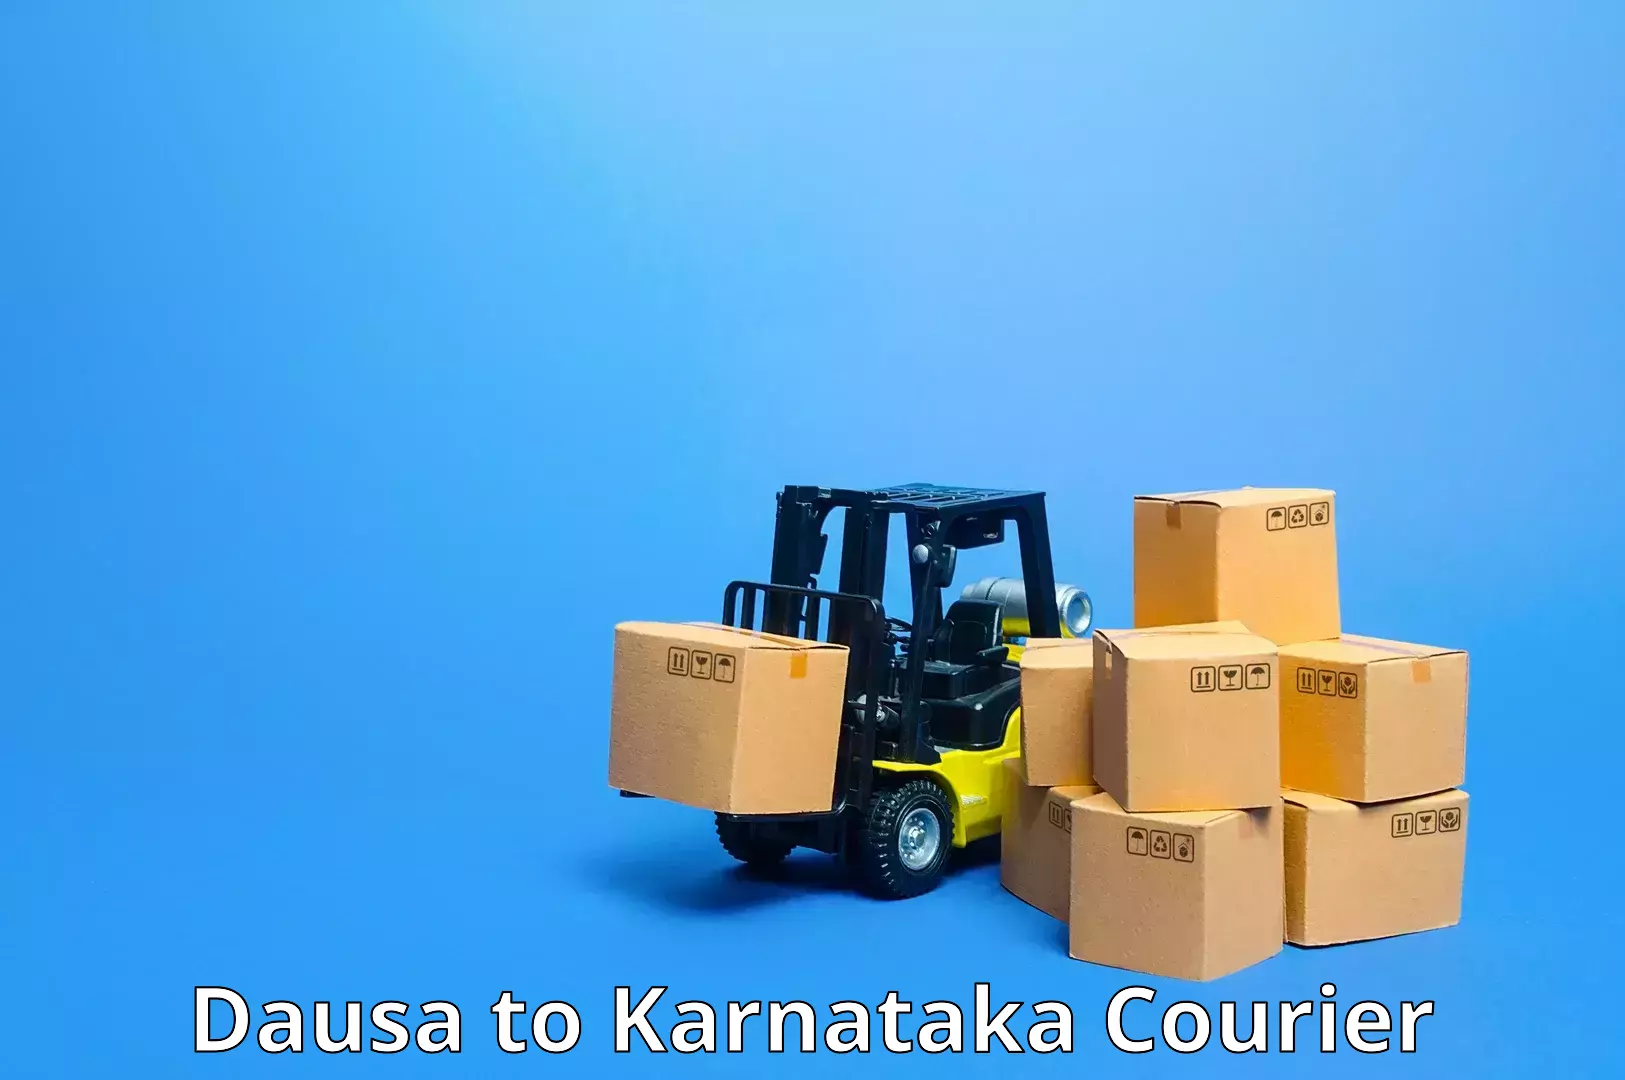 Sustainable delivery practices Dausa to Karnataka